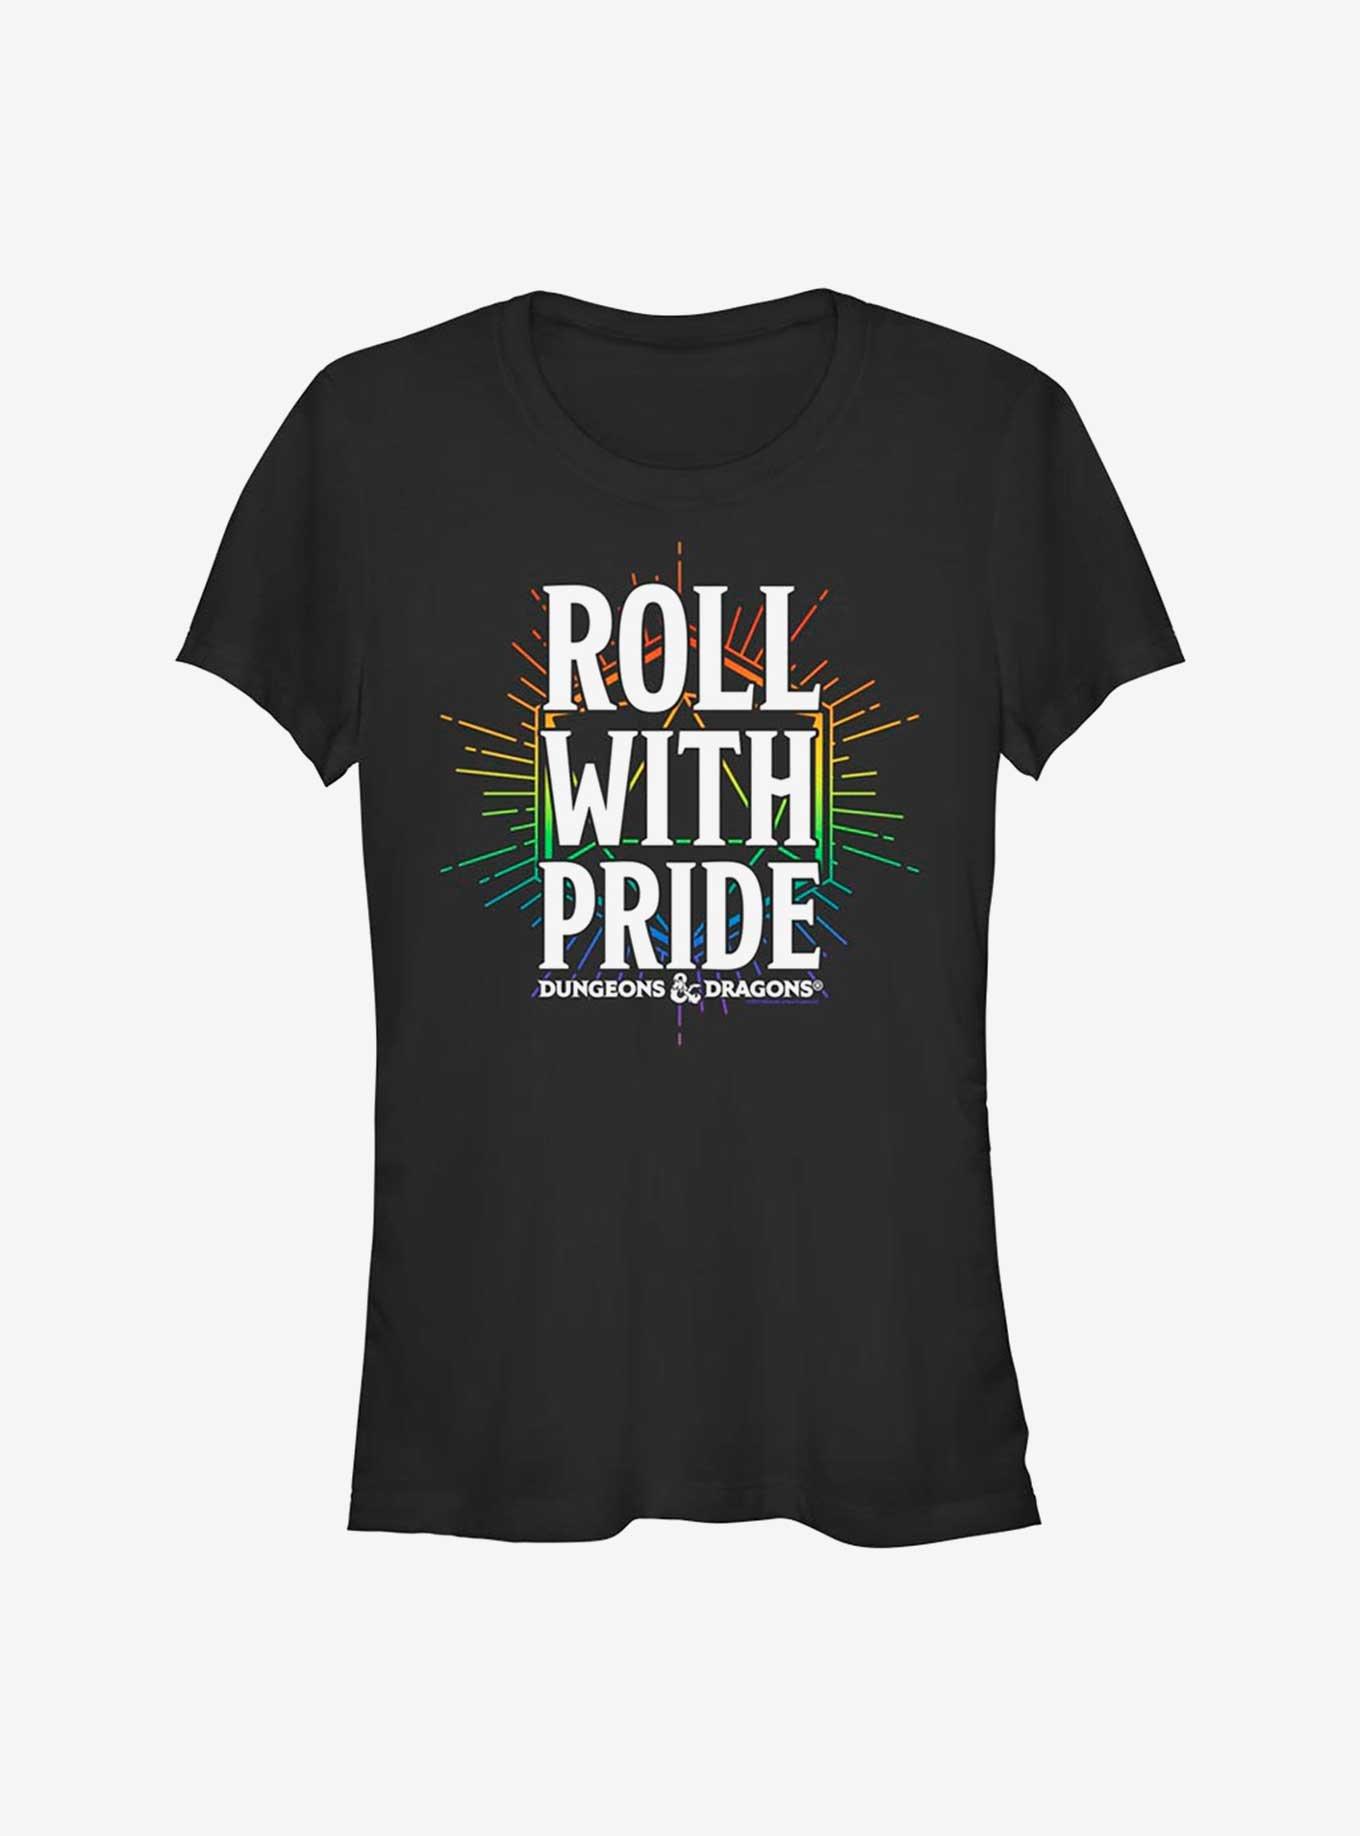 Dungeons & Dragons Roll With Pride T-Shirt